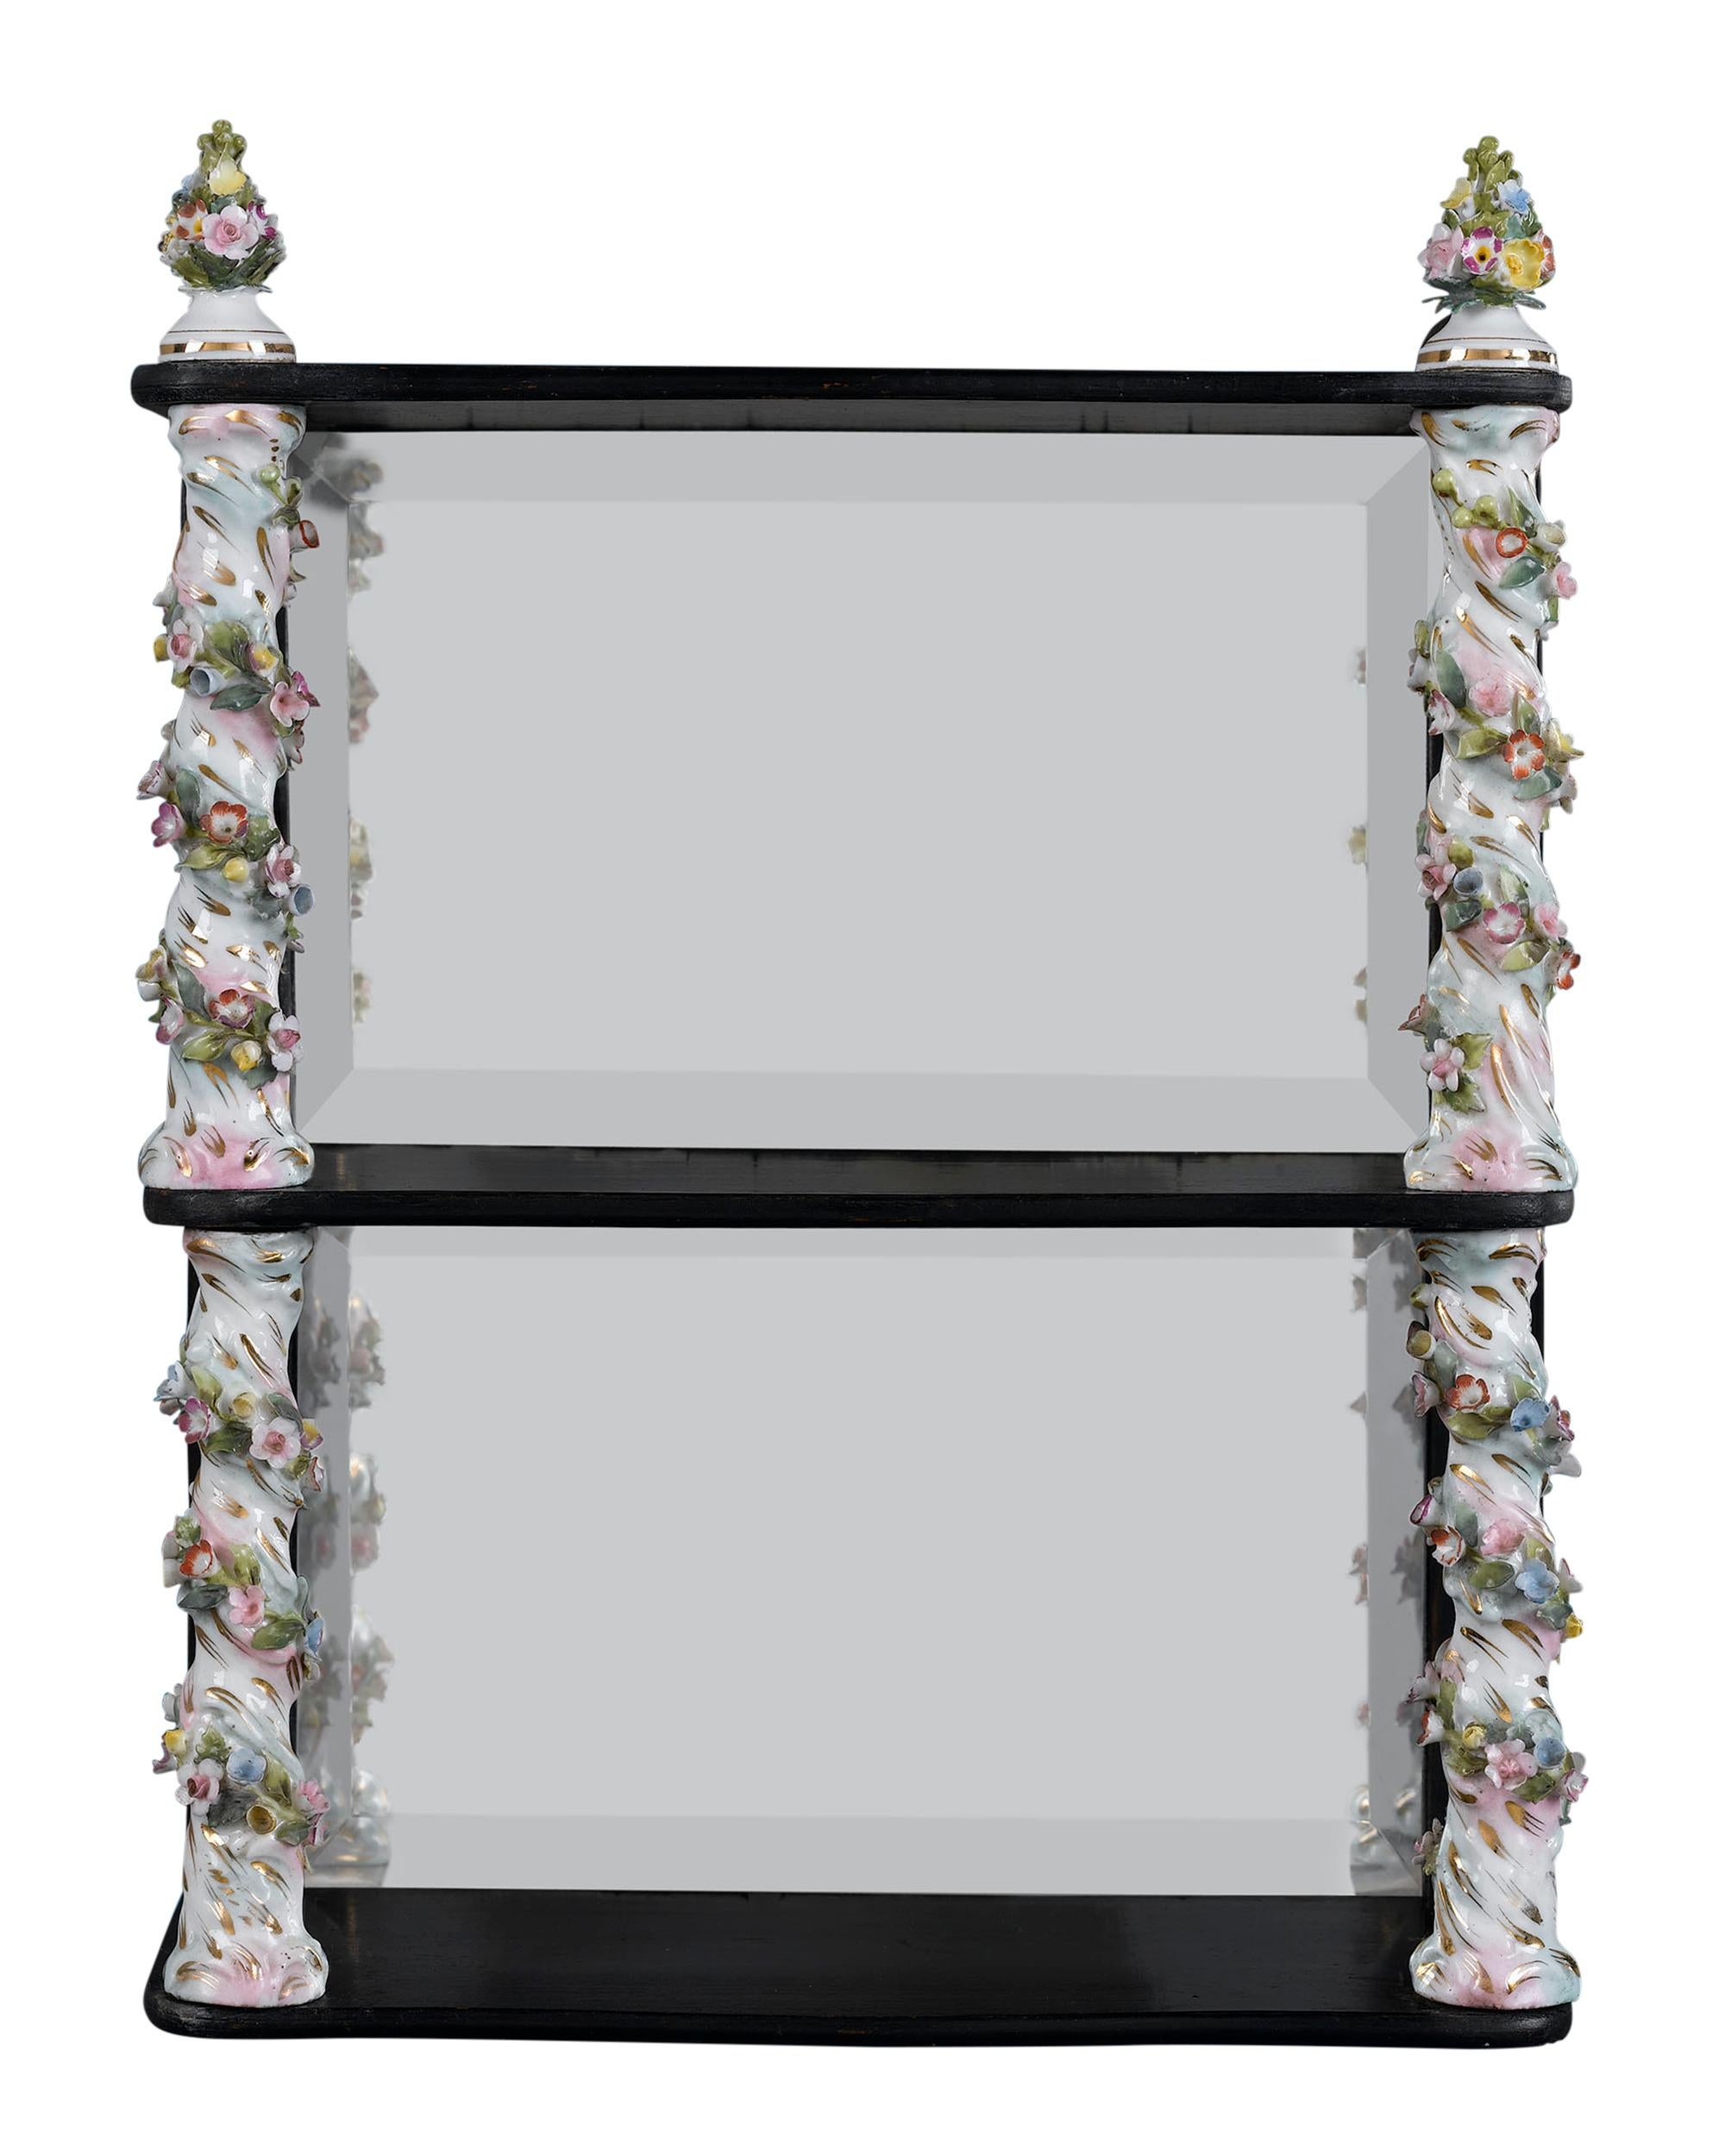 Elegant pillars of Meissen Porcelain distinguish this lovely pair of shelves. An ebonized wood frame gives them structure, and a mirrored backing completes their design.

circa 1880

Measures : 10